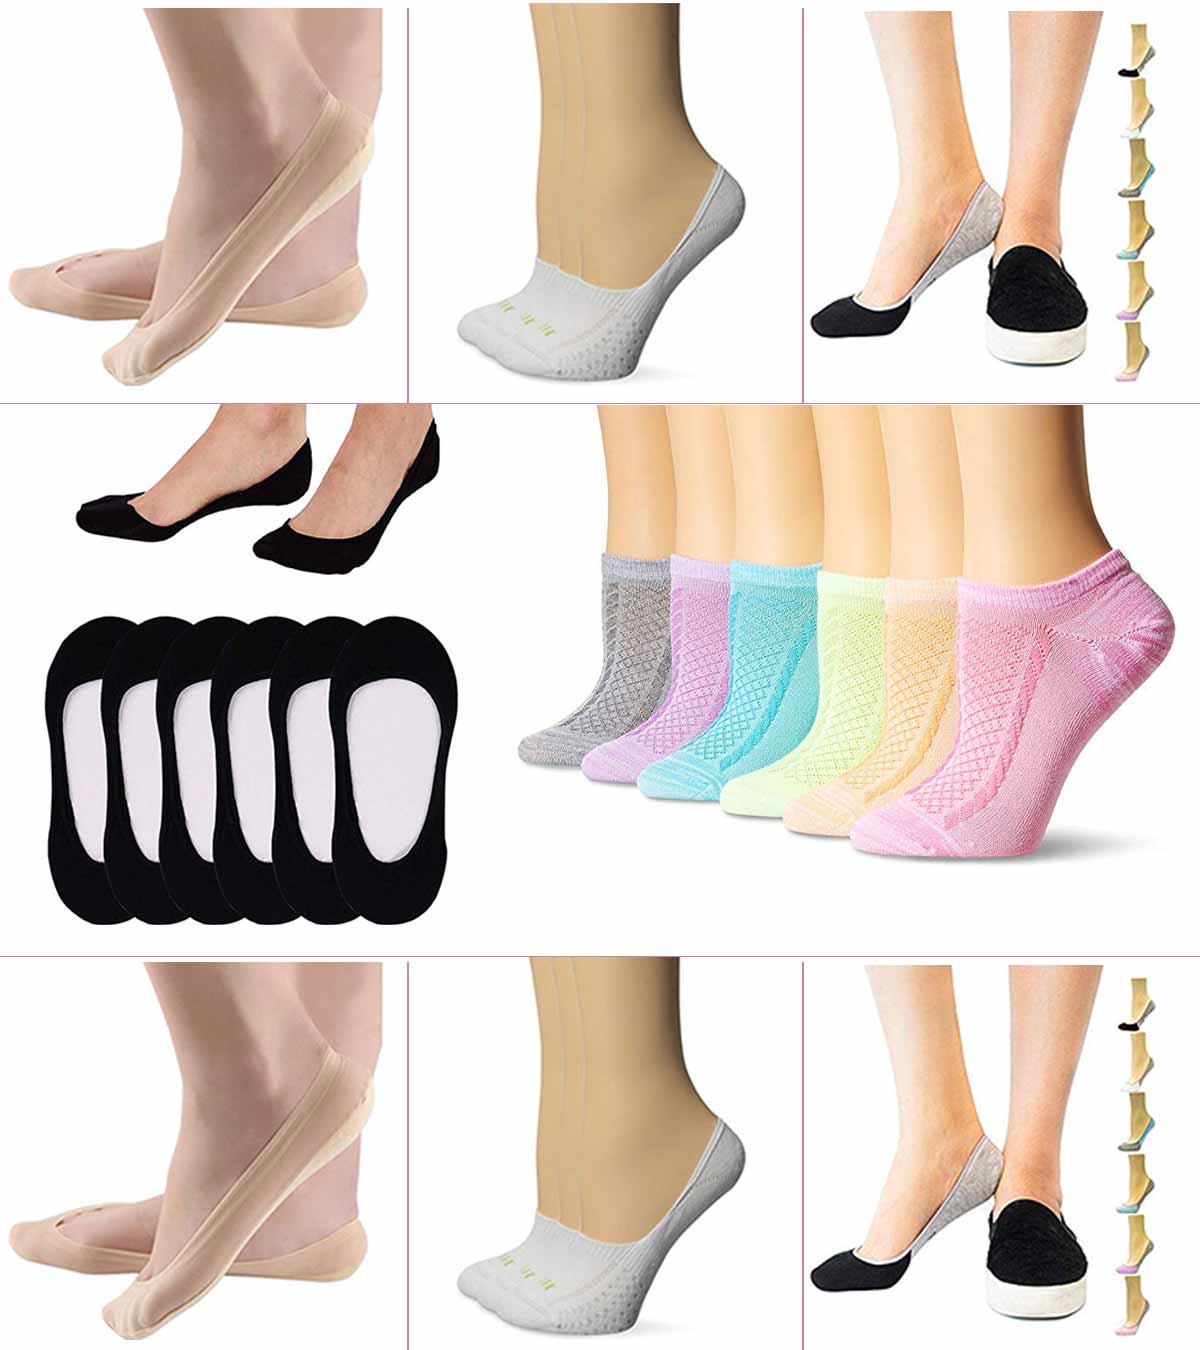 8 Pairs no show socks for women size 6-9 Ultra Low Cut socks for flats liner socks Hidden Invisible for Boat Loafer Summer